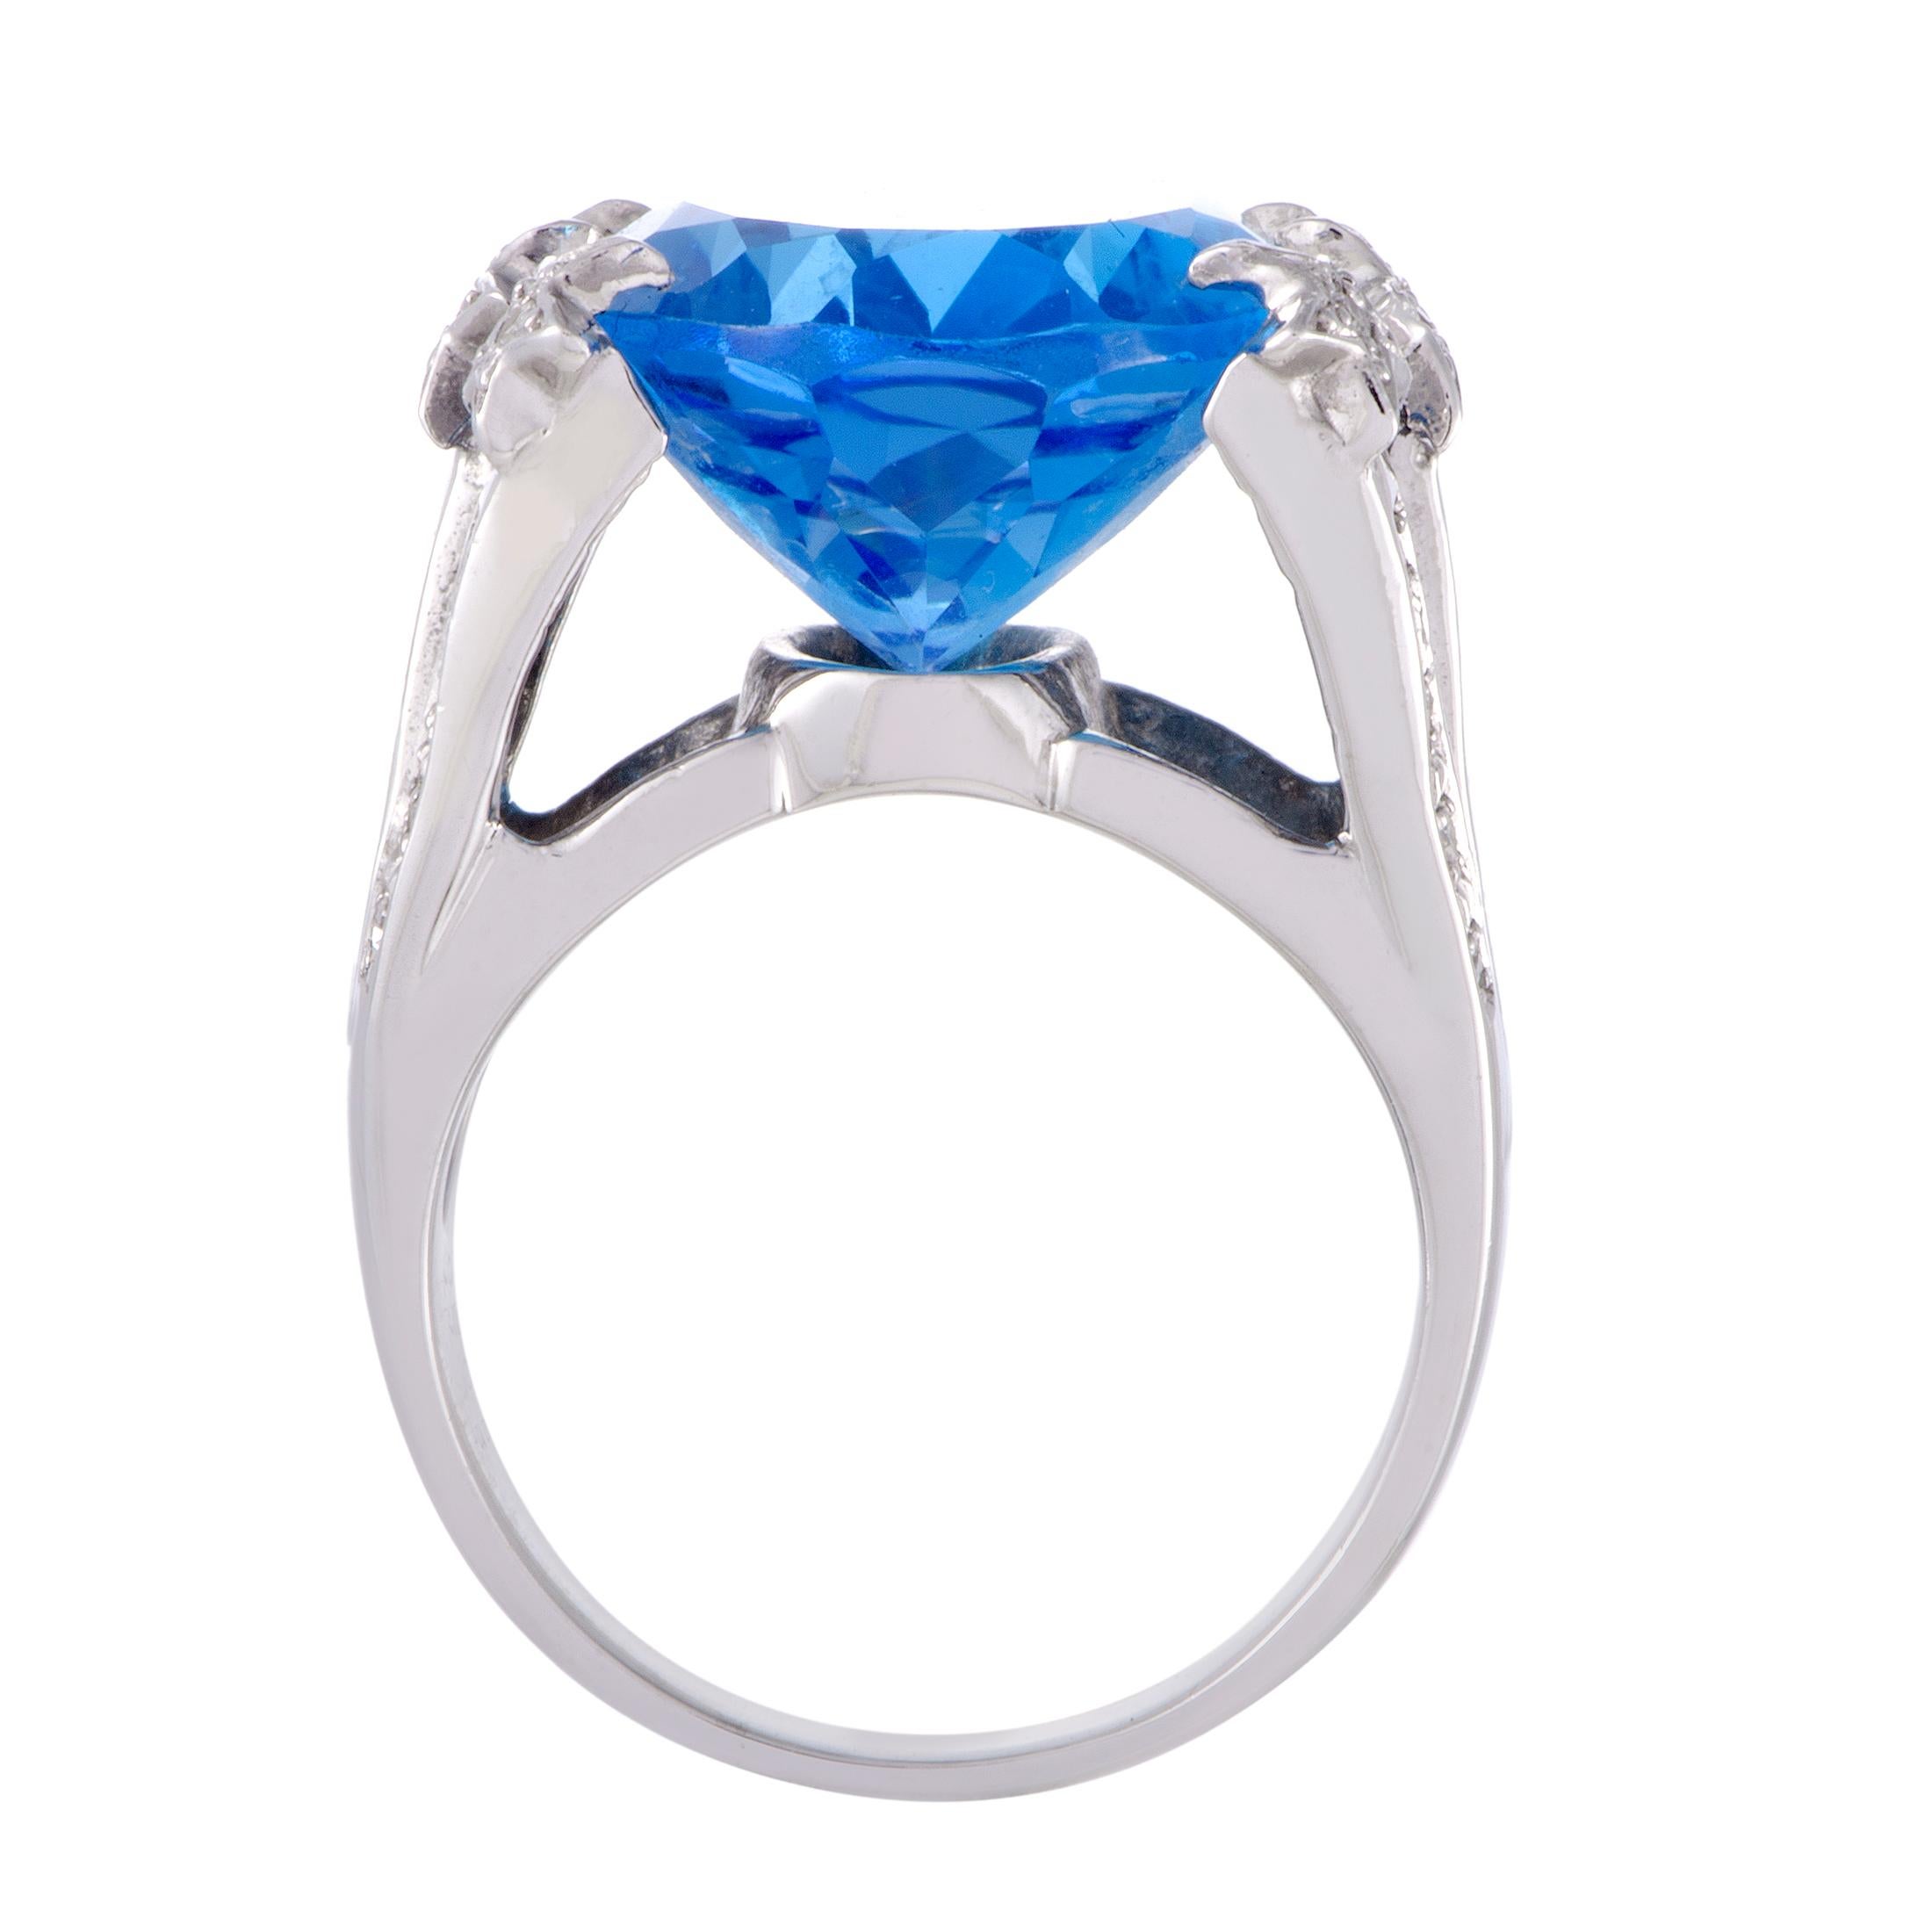 Provided a brilliant pedestal in the form of shimmering 14K white gold and resplendent diamonds weighing in total 0.26ct, the astonishing topaz weighing 25.77 carats compels with its attractive color, neat cut and sheer size.
 Ring Top Dimensions: